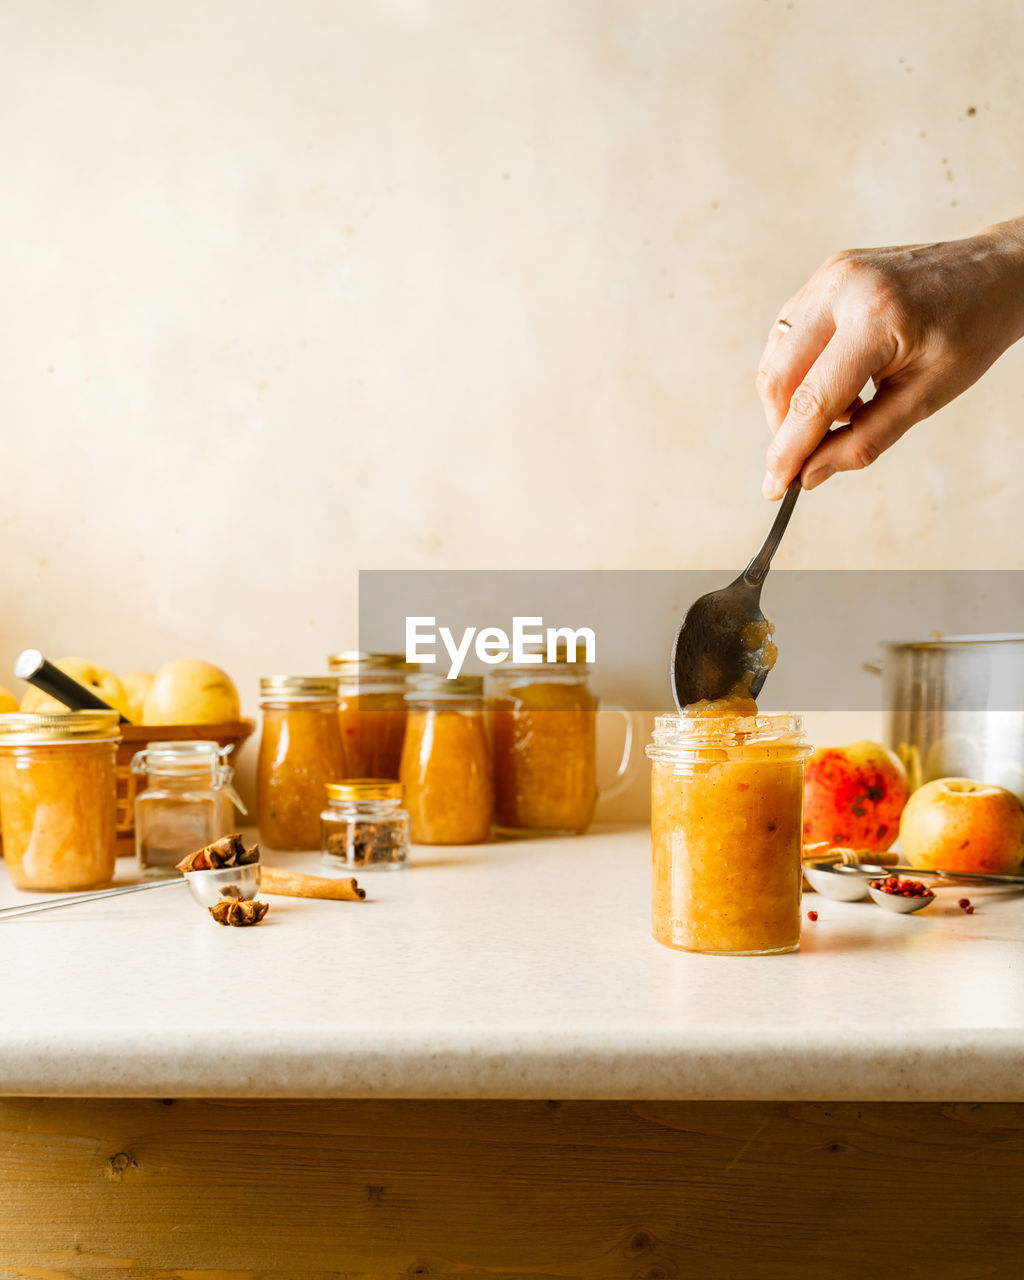 Woman filling glass jars with homemade apple sauce